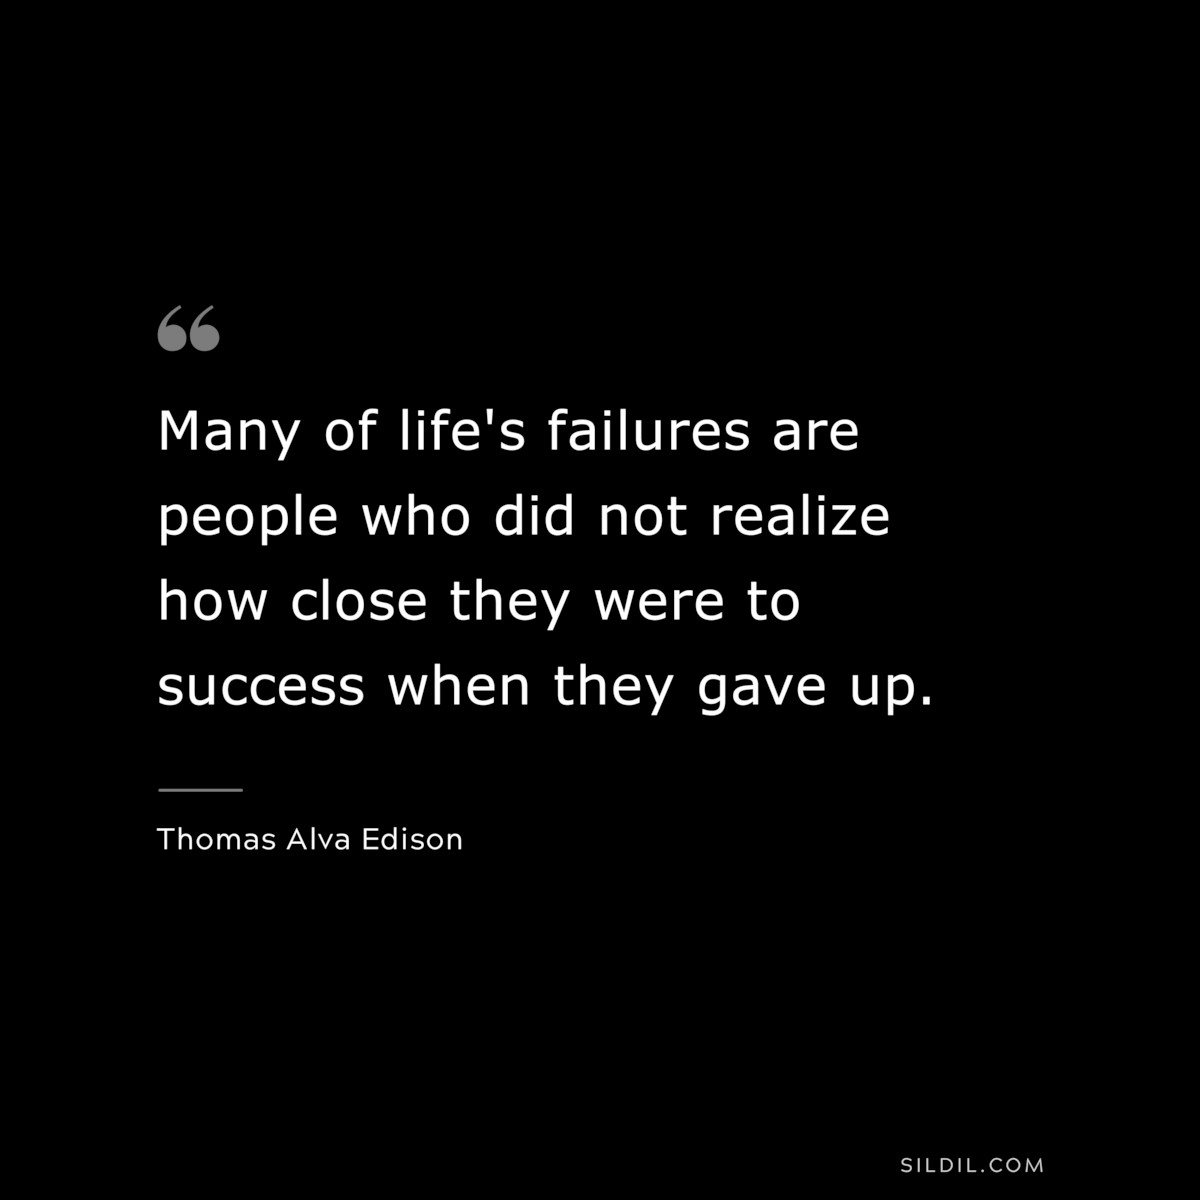 Many of life's failures are people who did not realize how close they were to success when they gave up. ― Thomas Alva Edison